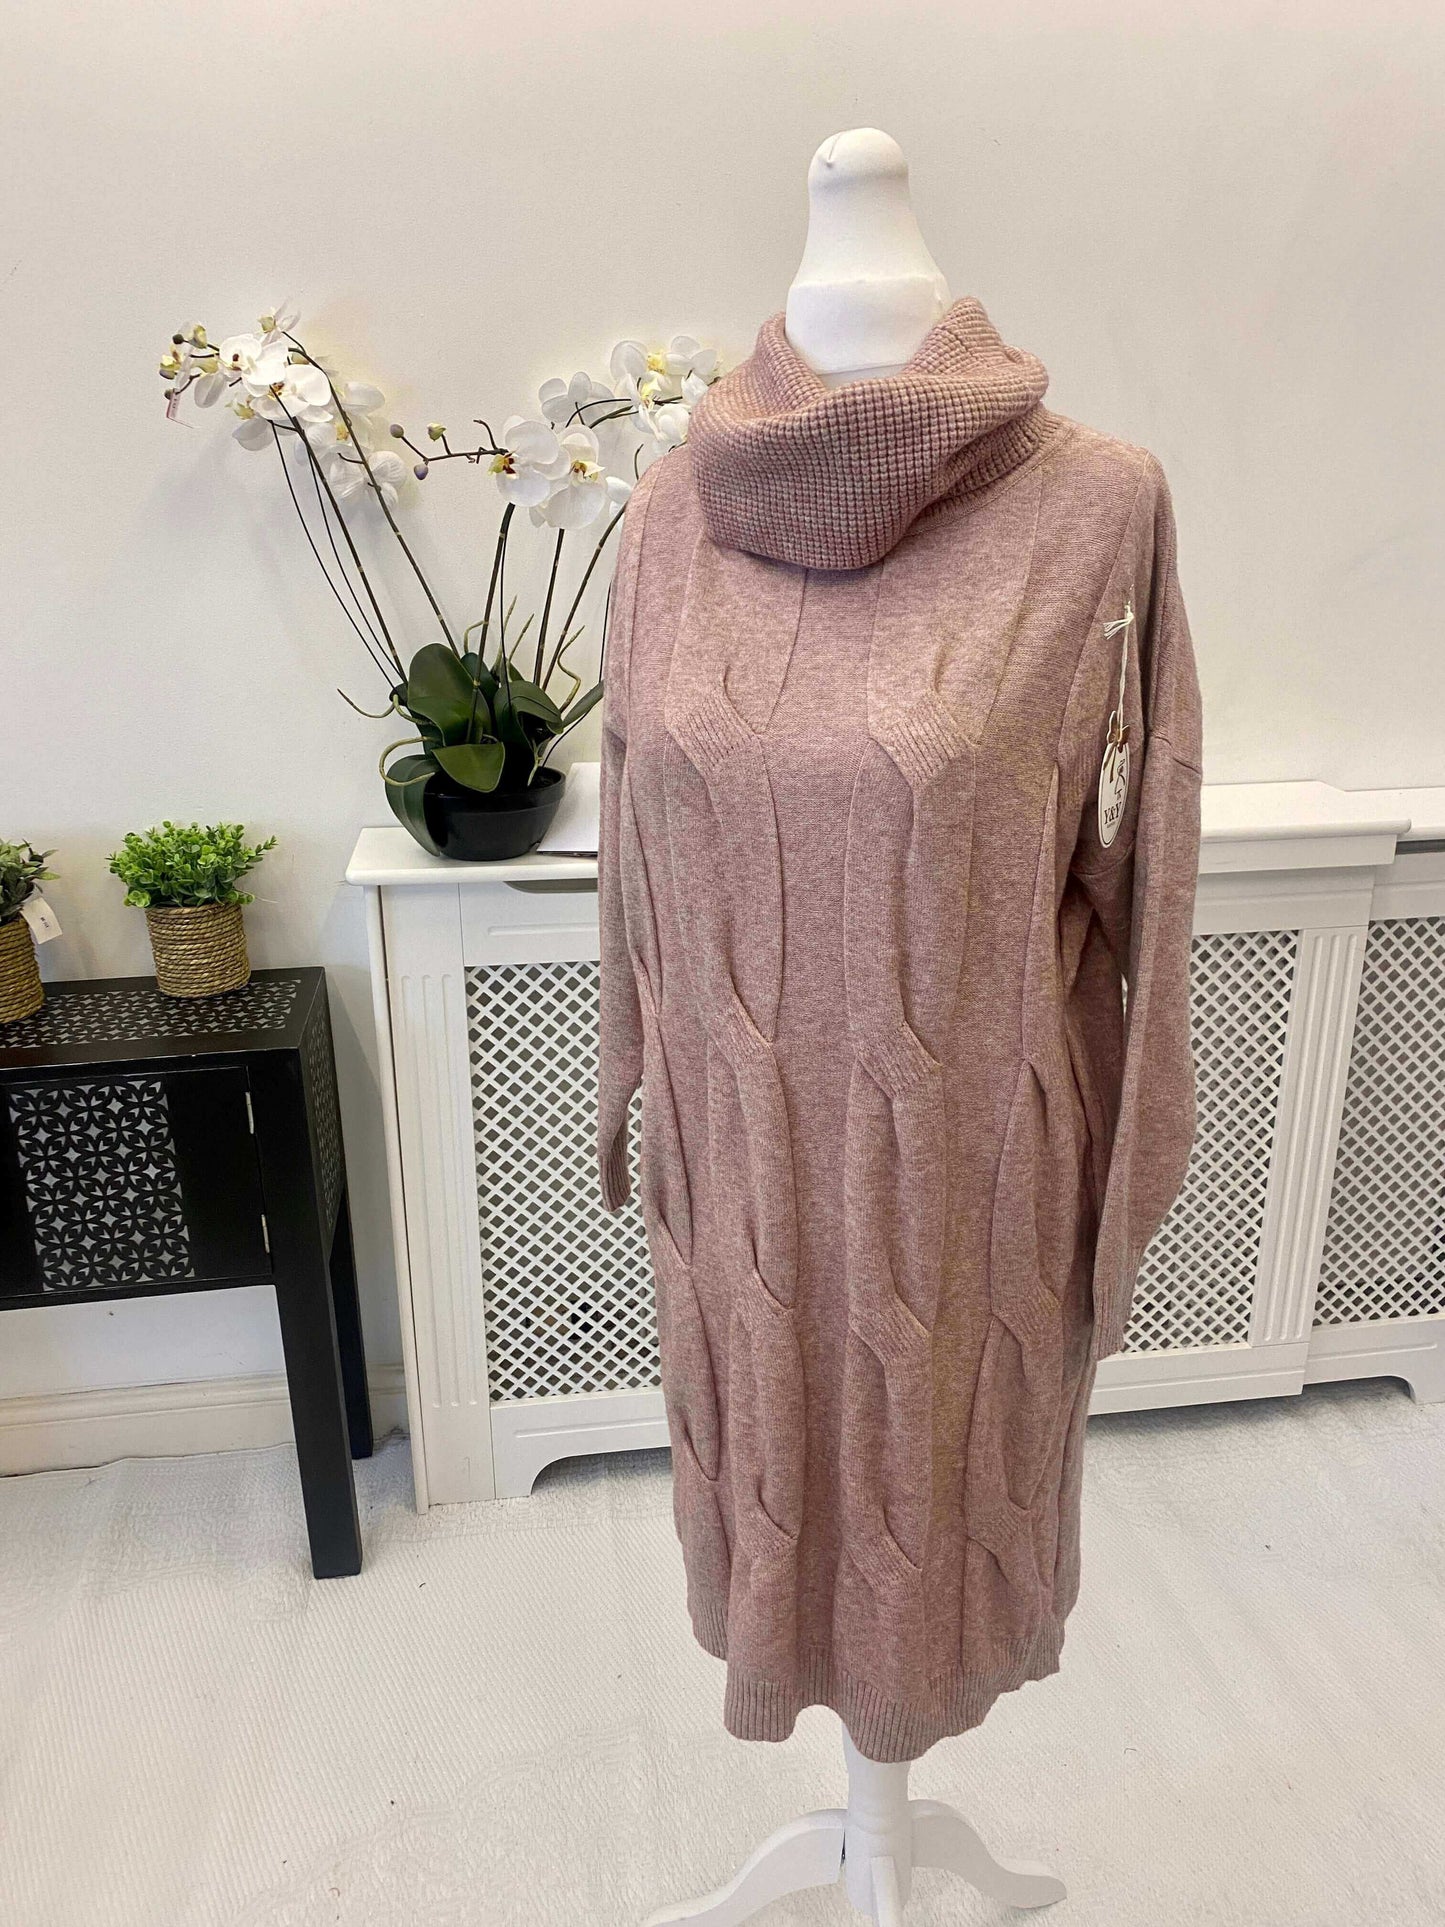 Peggy Cable Cowl Neck Jumper Dress